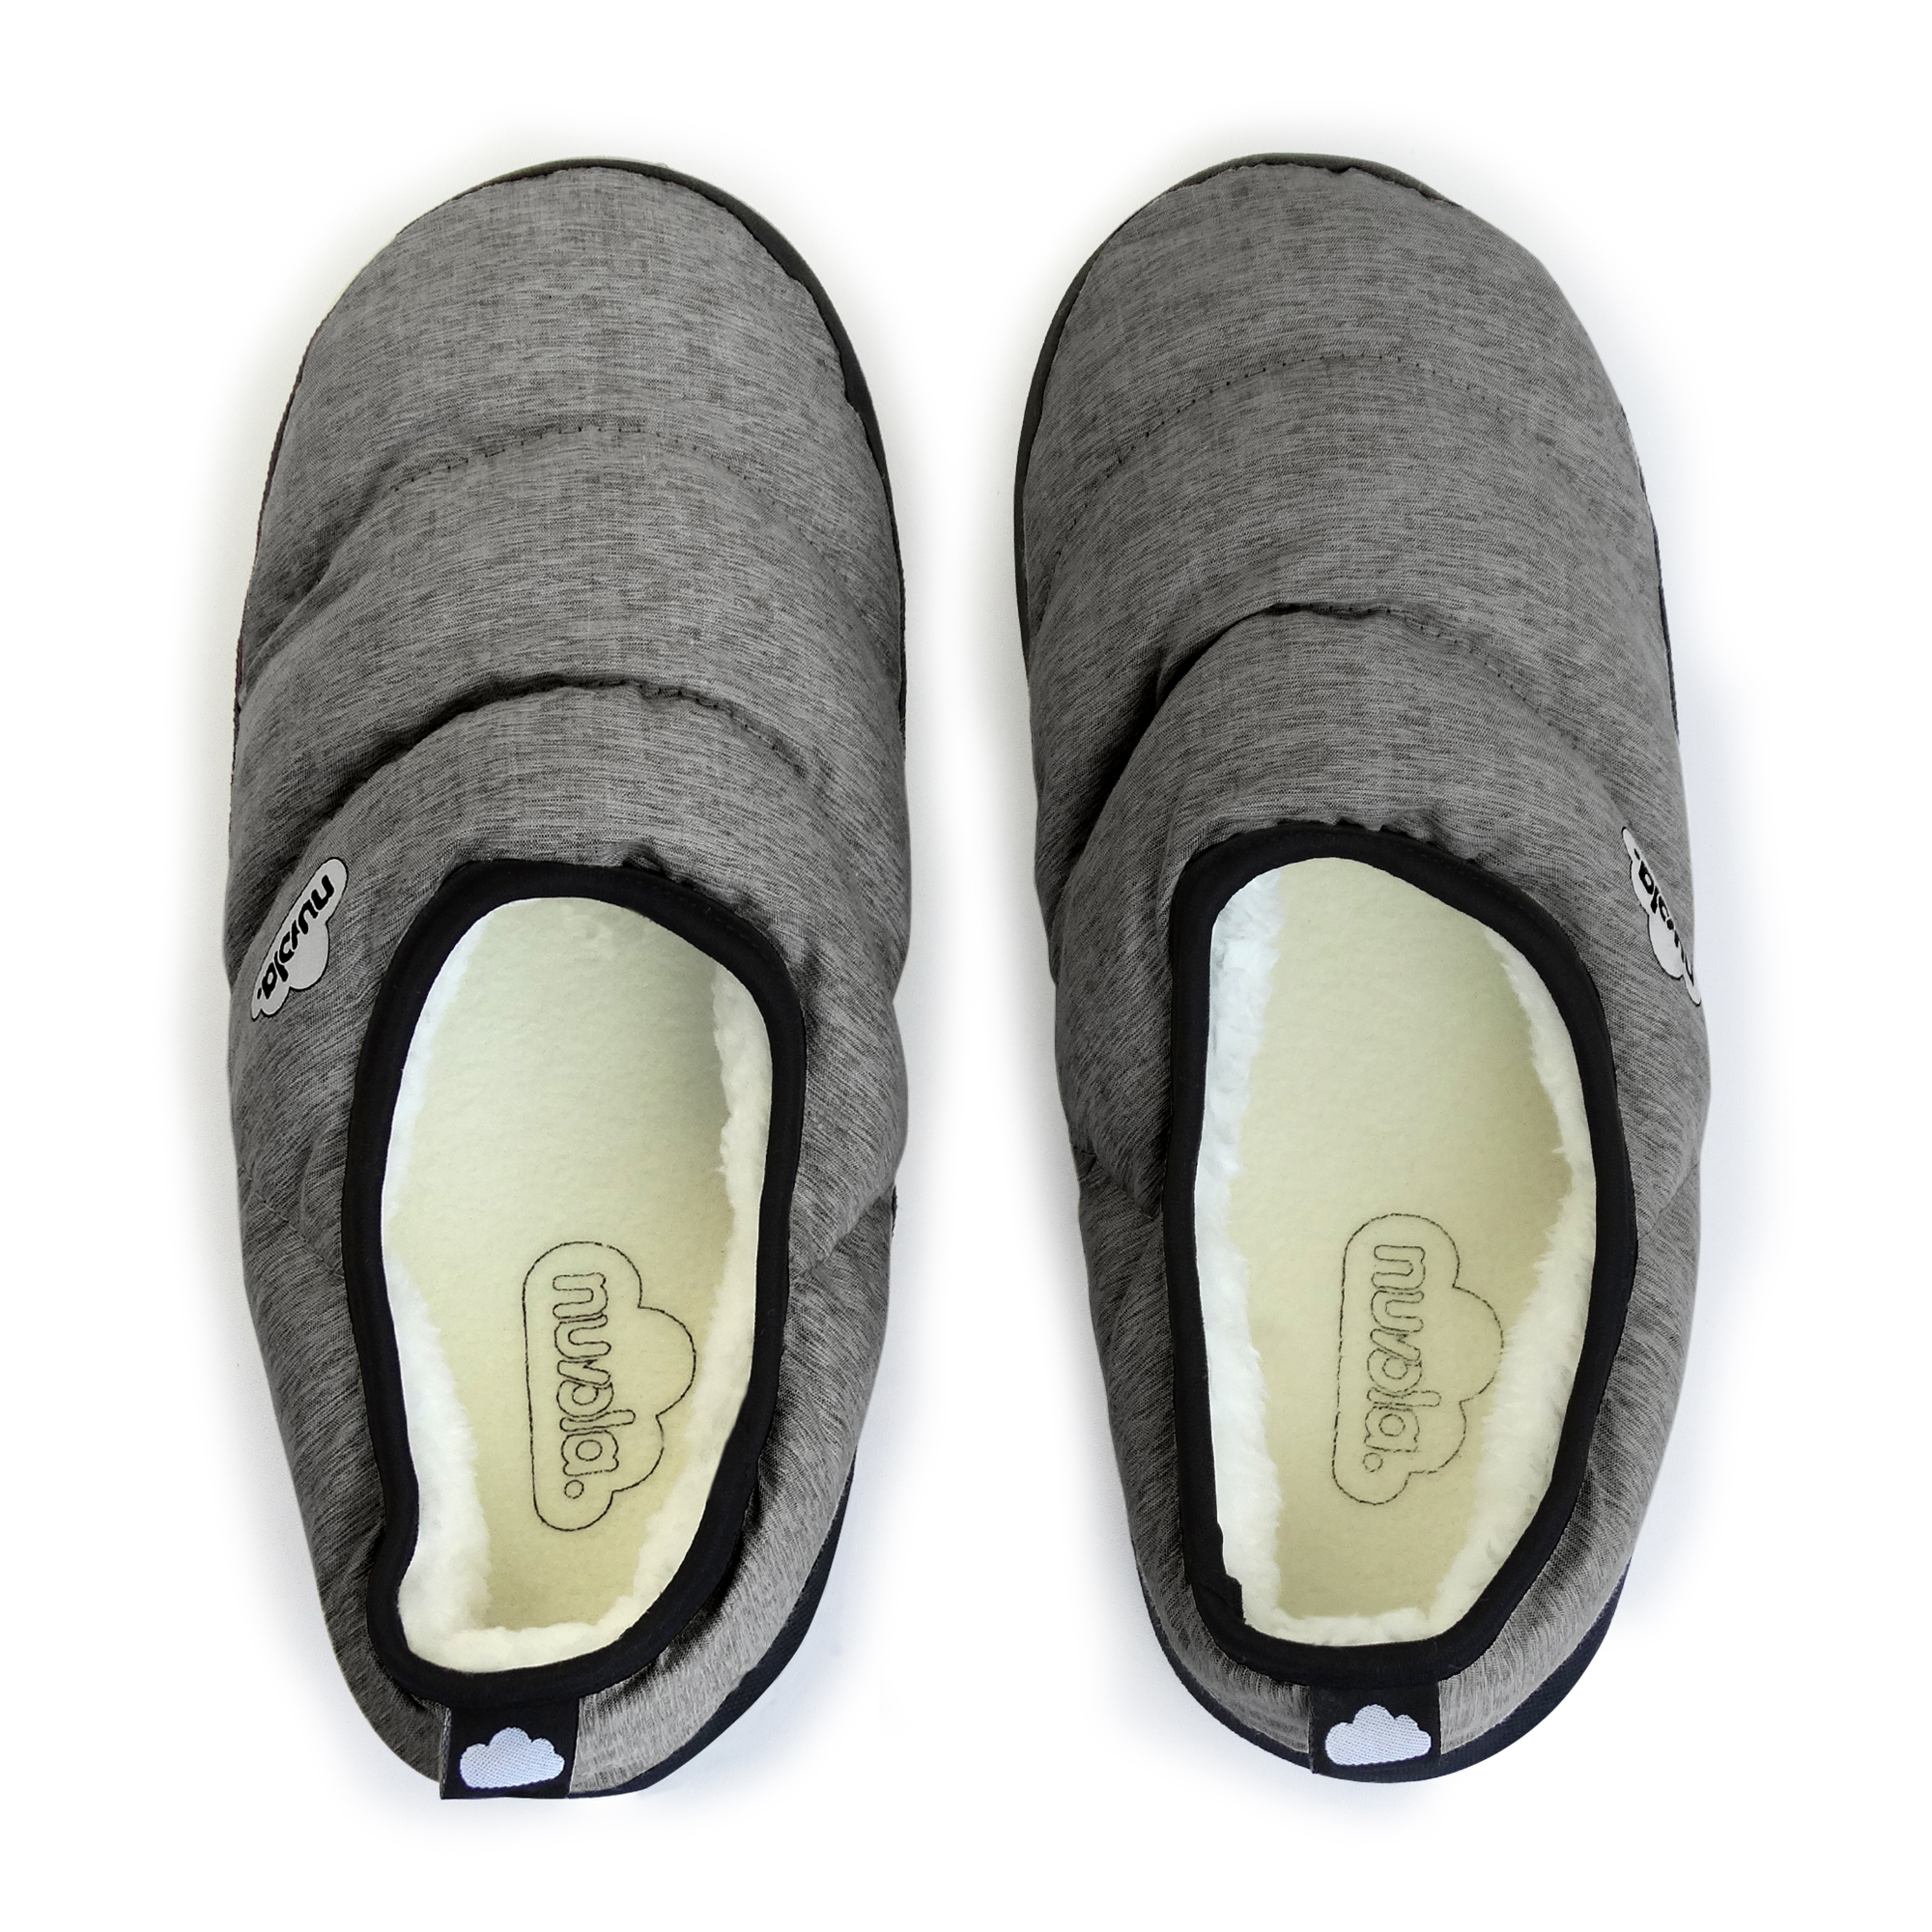 Slippers Camping Nuvola®,marbled Chill